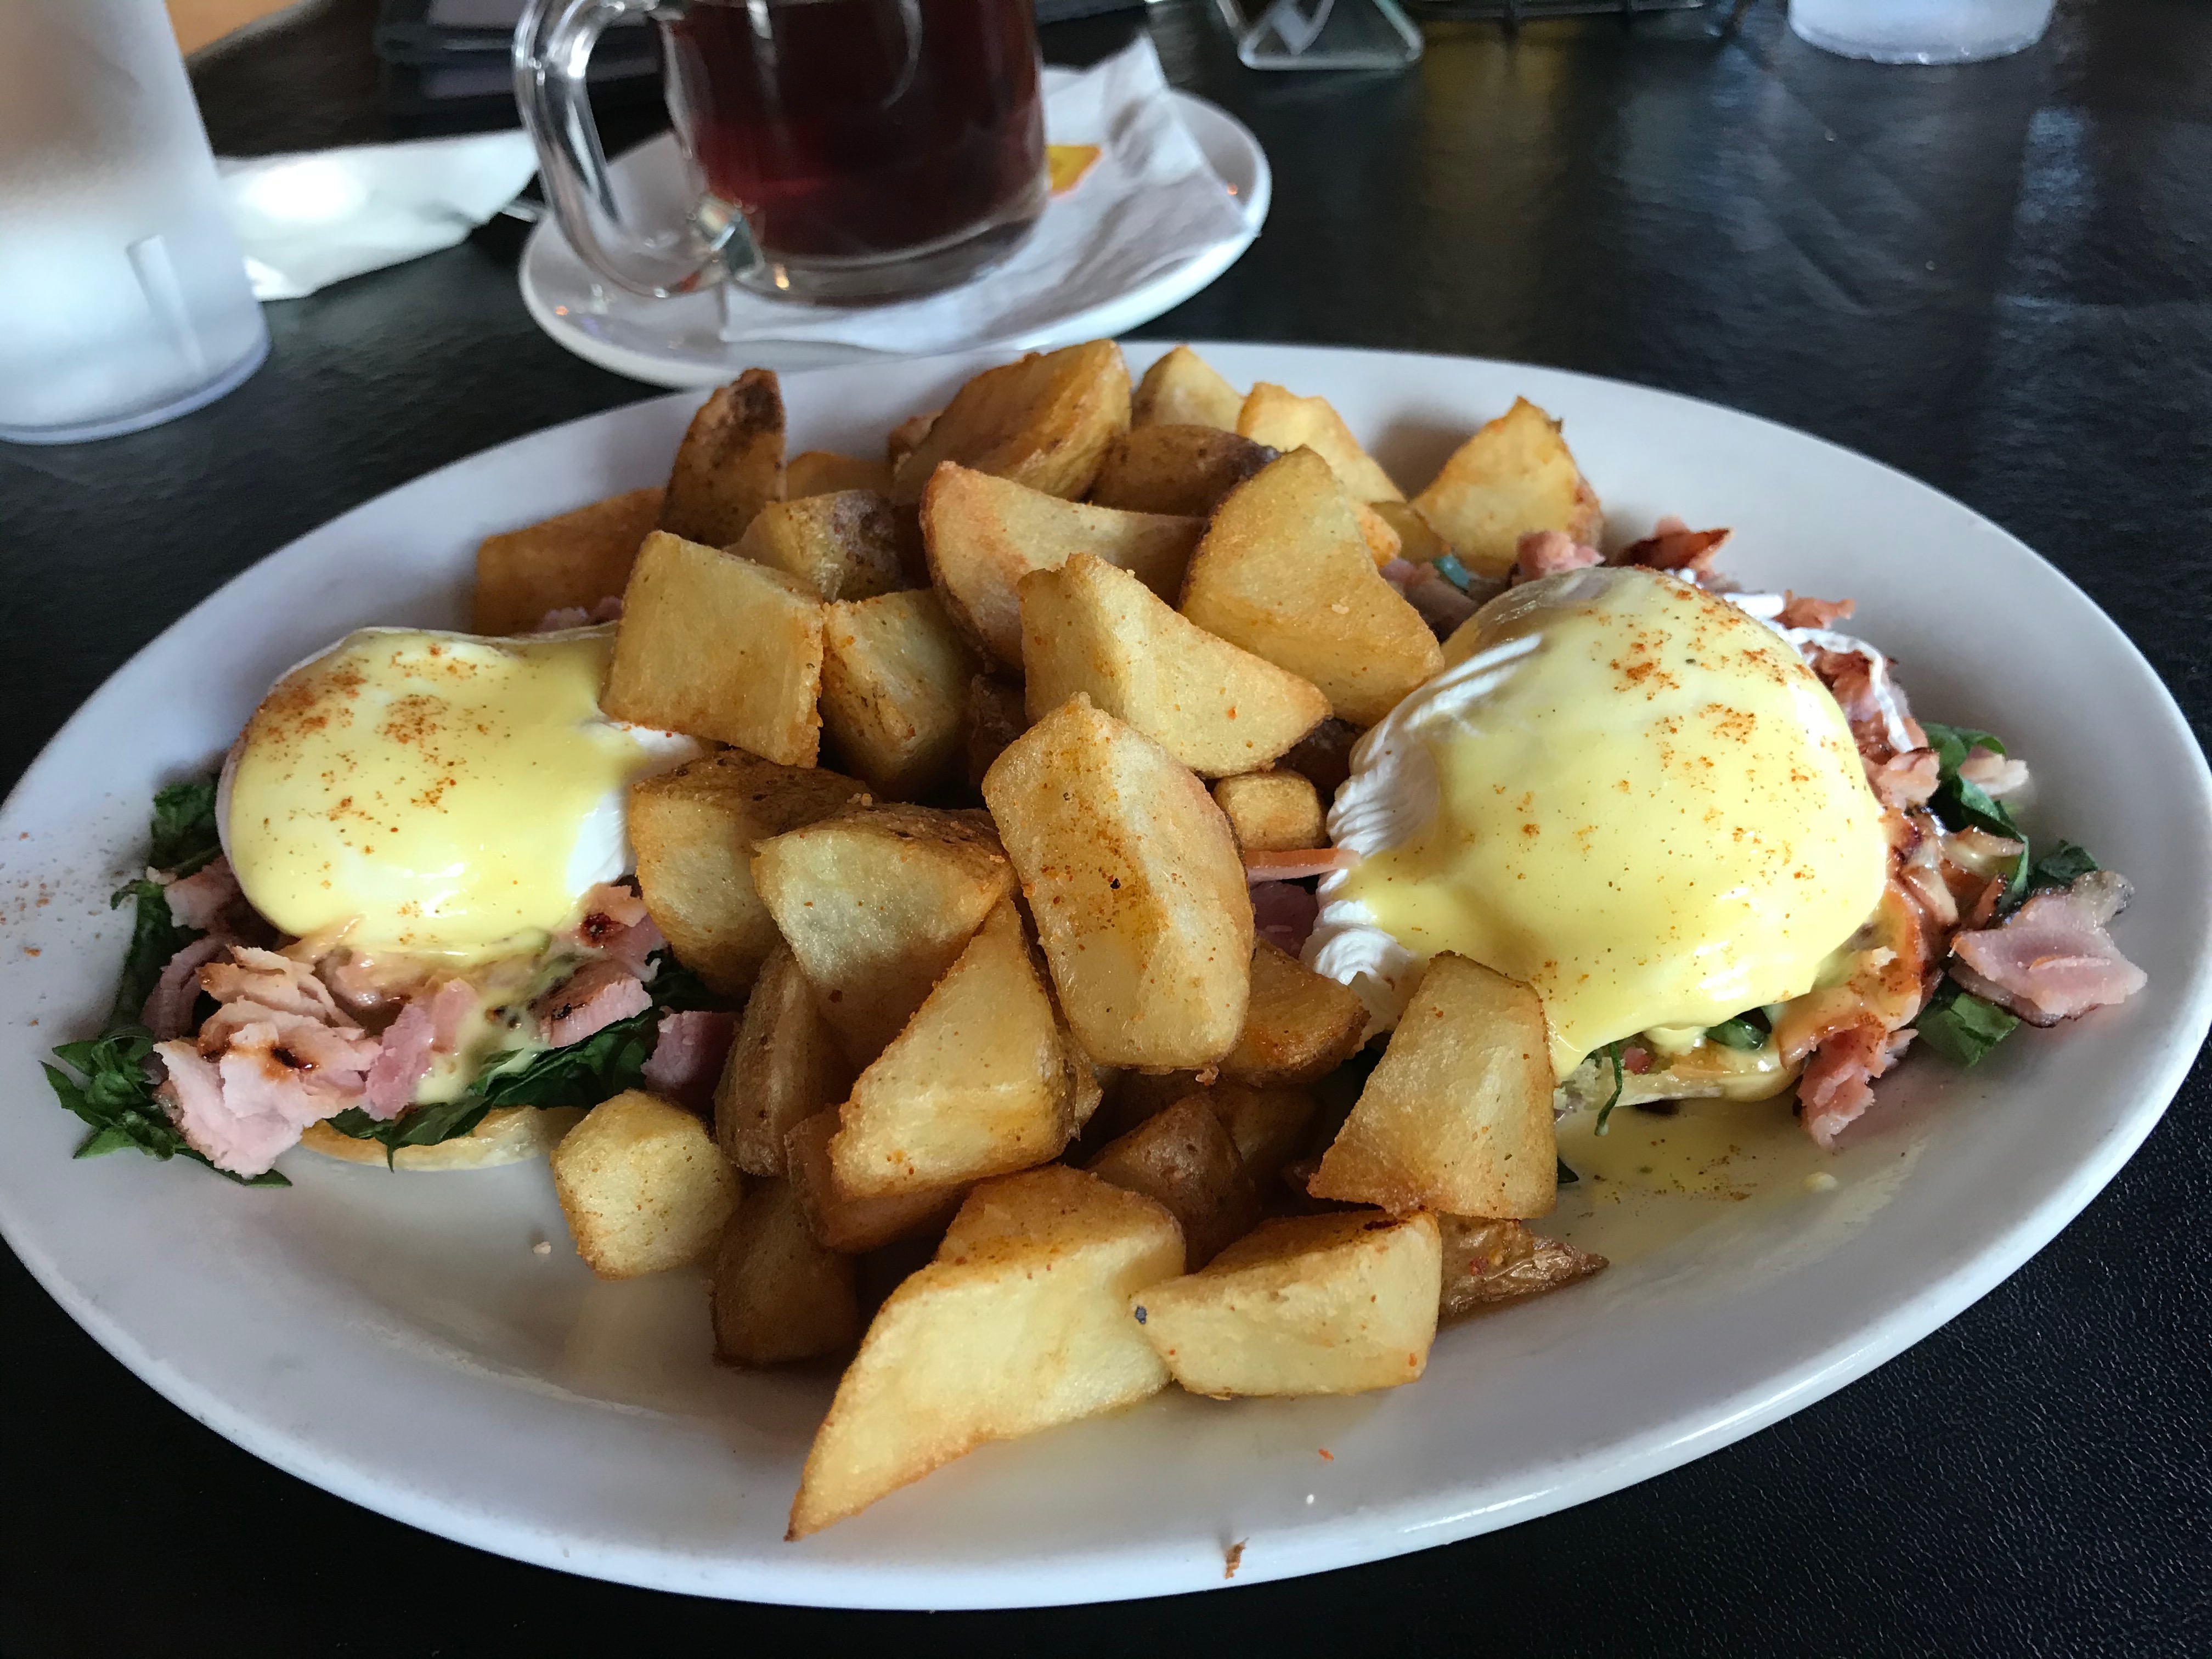 restaurants to have Brunch in 7 Northeast Ohio counties based on restaurant - cleveland.com